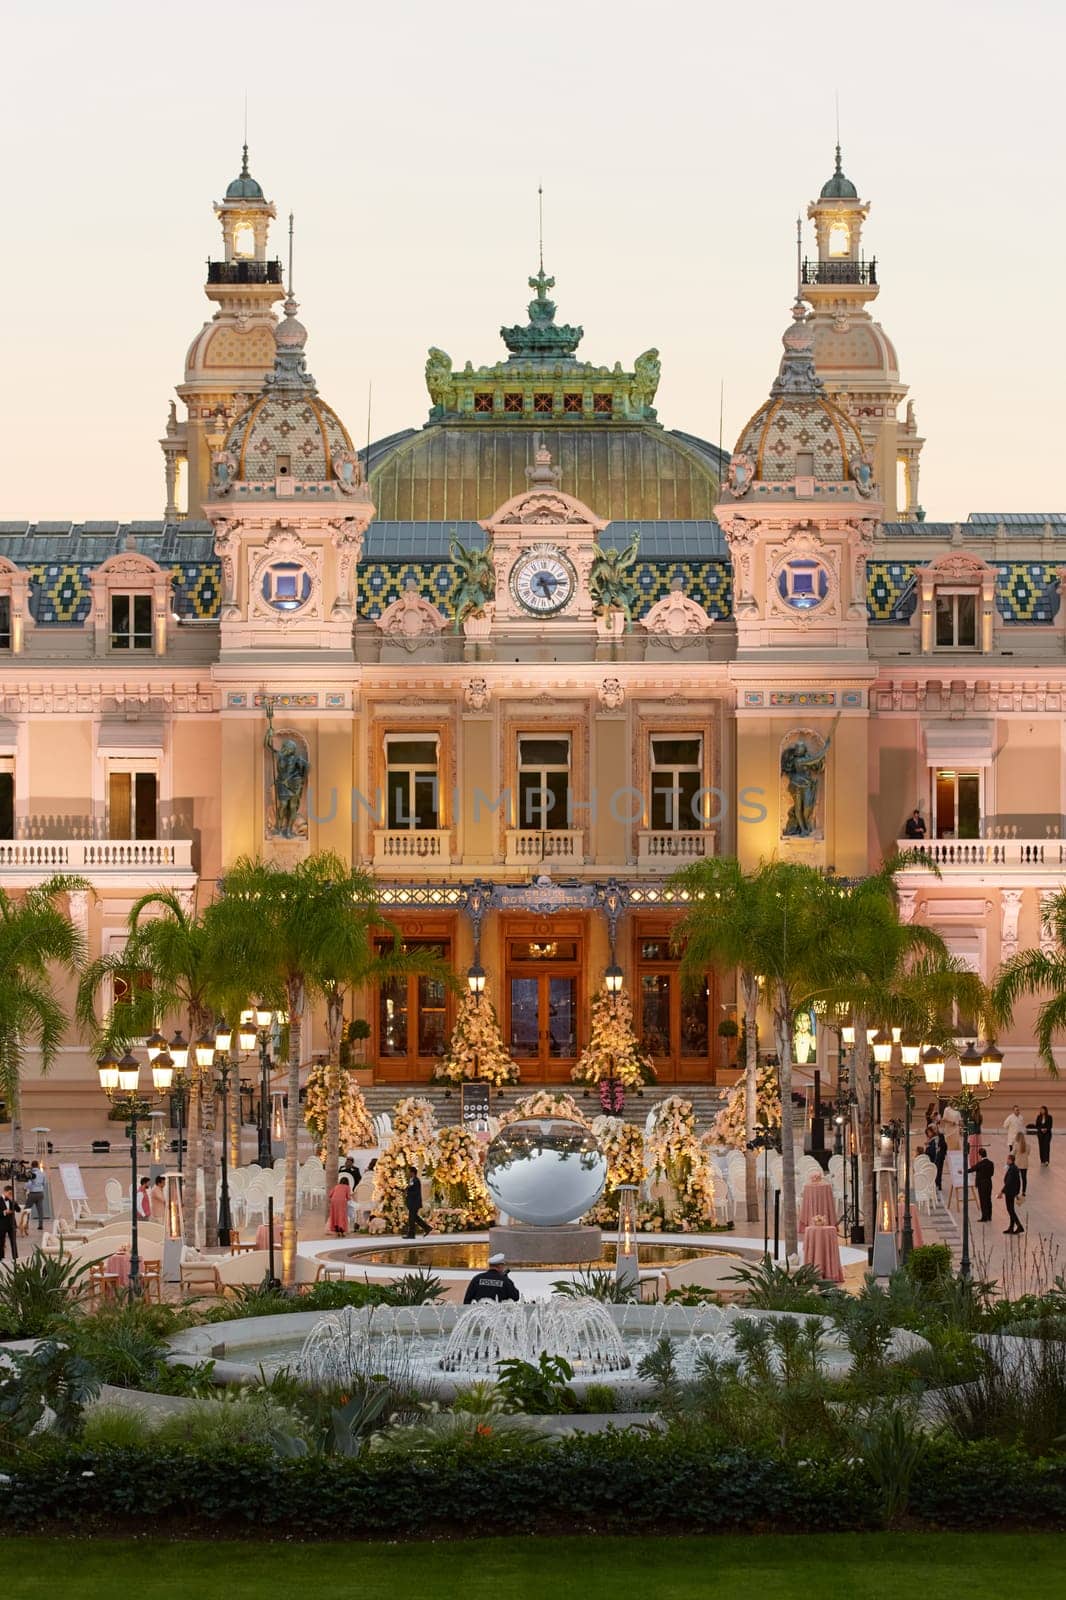 Monaco, Monte-Carlo, 21 October 2022: Square Casino Monte-Carlo at sunny day, a lot of luxury cars, Hotel de Paris, wealth life, tourists take pictures of the landmark, pine trees, blue sky, flowers. High quality 4k footage